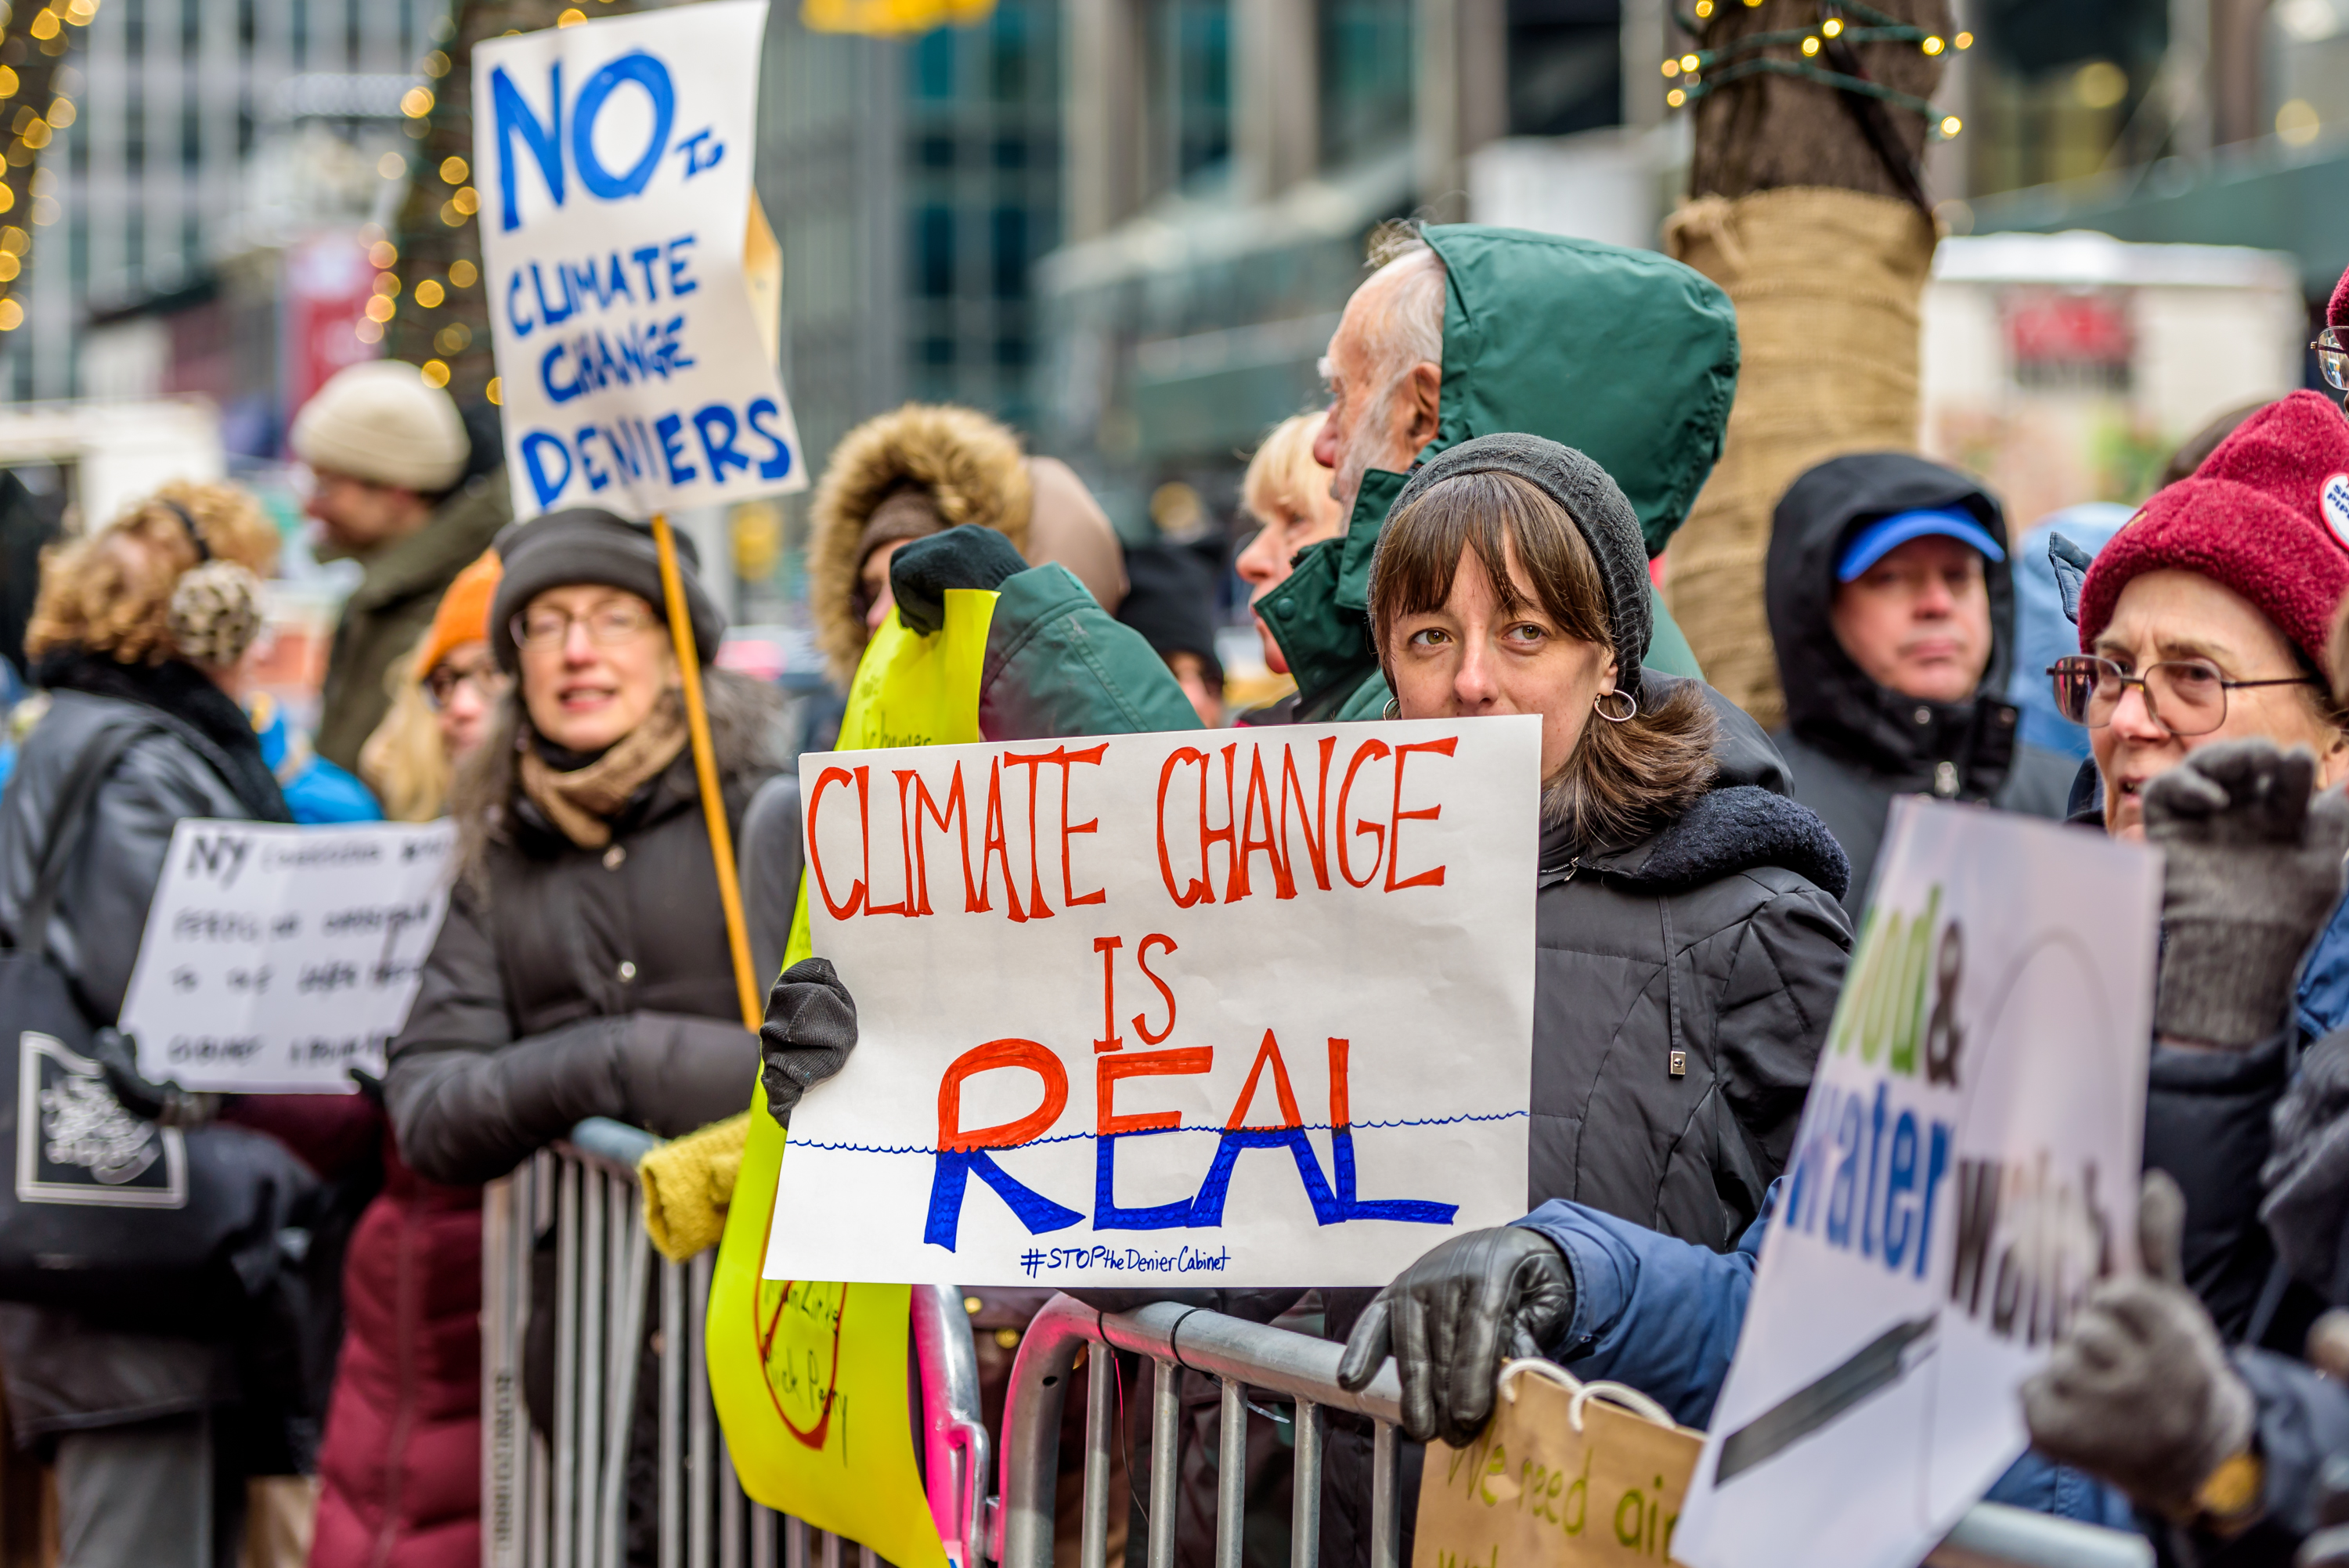 New York activist groups urge Senators Chuck Schumer and Kirsten Gillibrand to oppose President Donald Trump's policies on climate change outside Schumer's office on Jan 9. (Erik McGregor/Pacific Press—LightRocket via Getty Images)